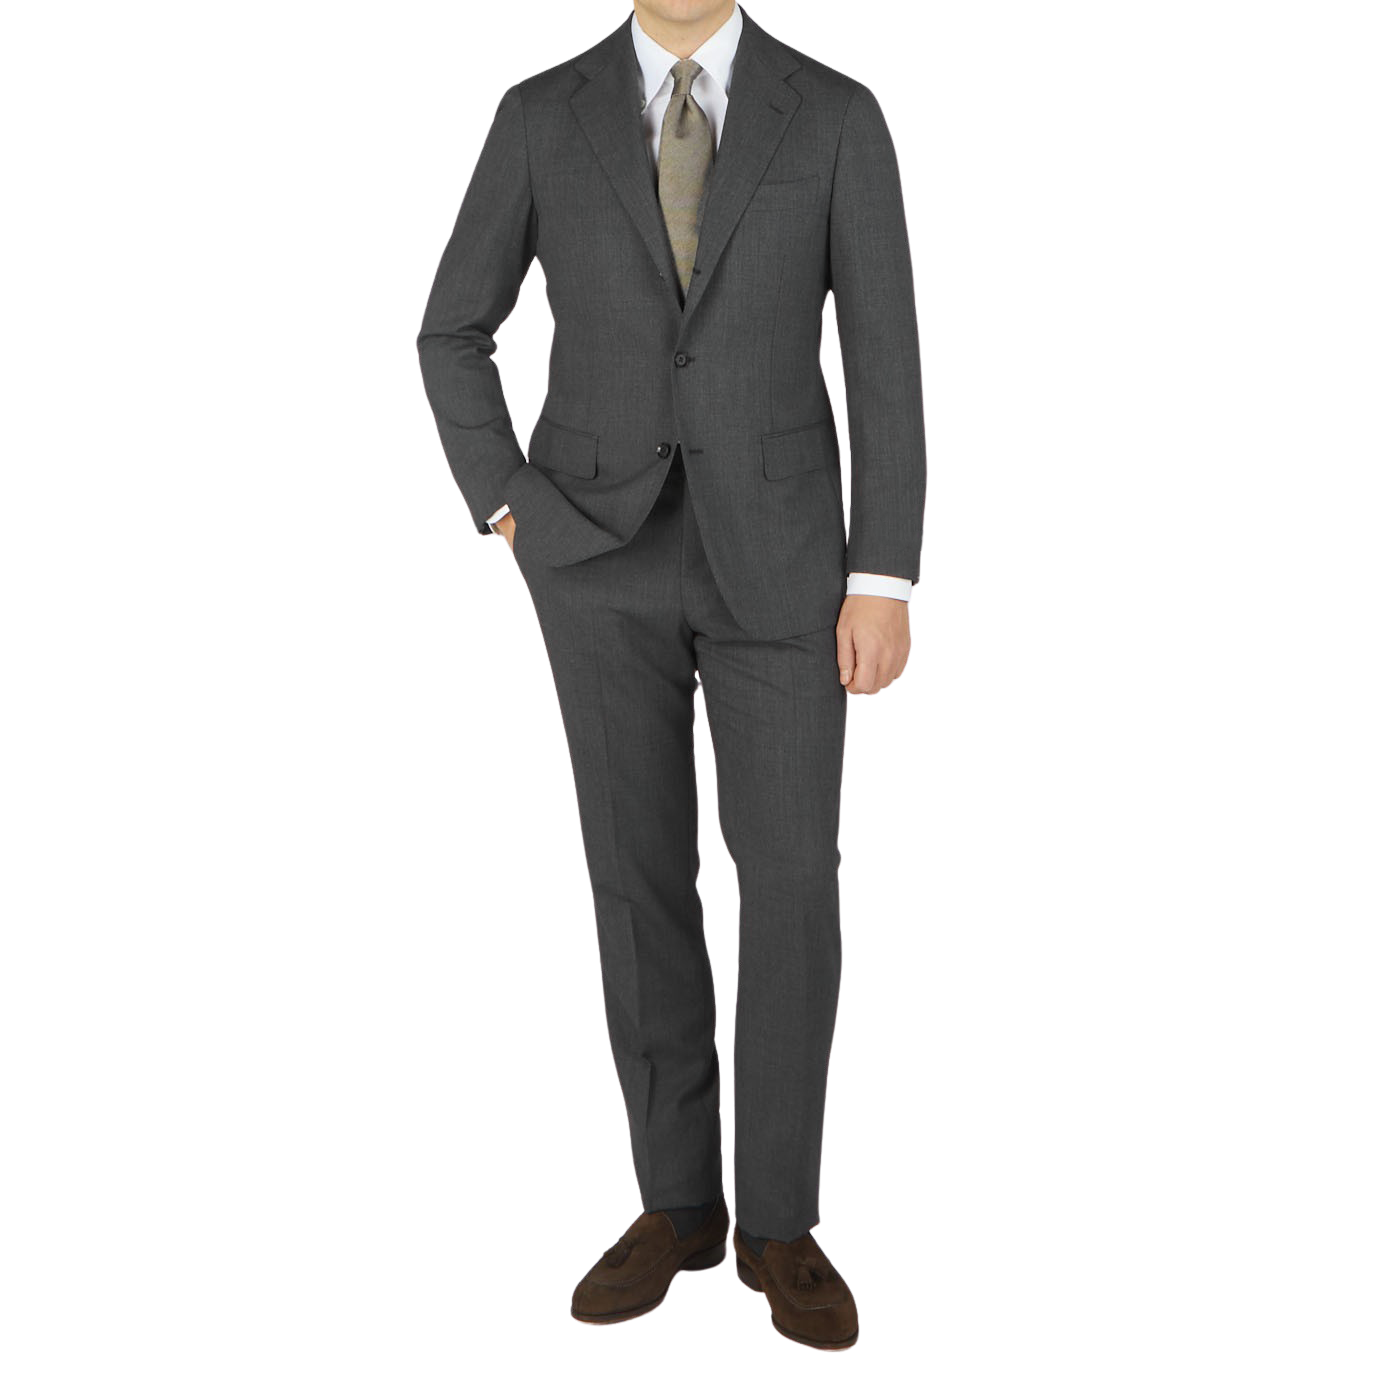 A man is posing in a Grey High Twist Wool Suit made by Ring Jacket.